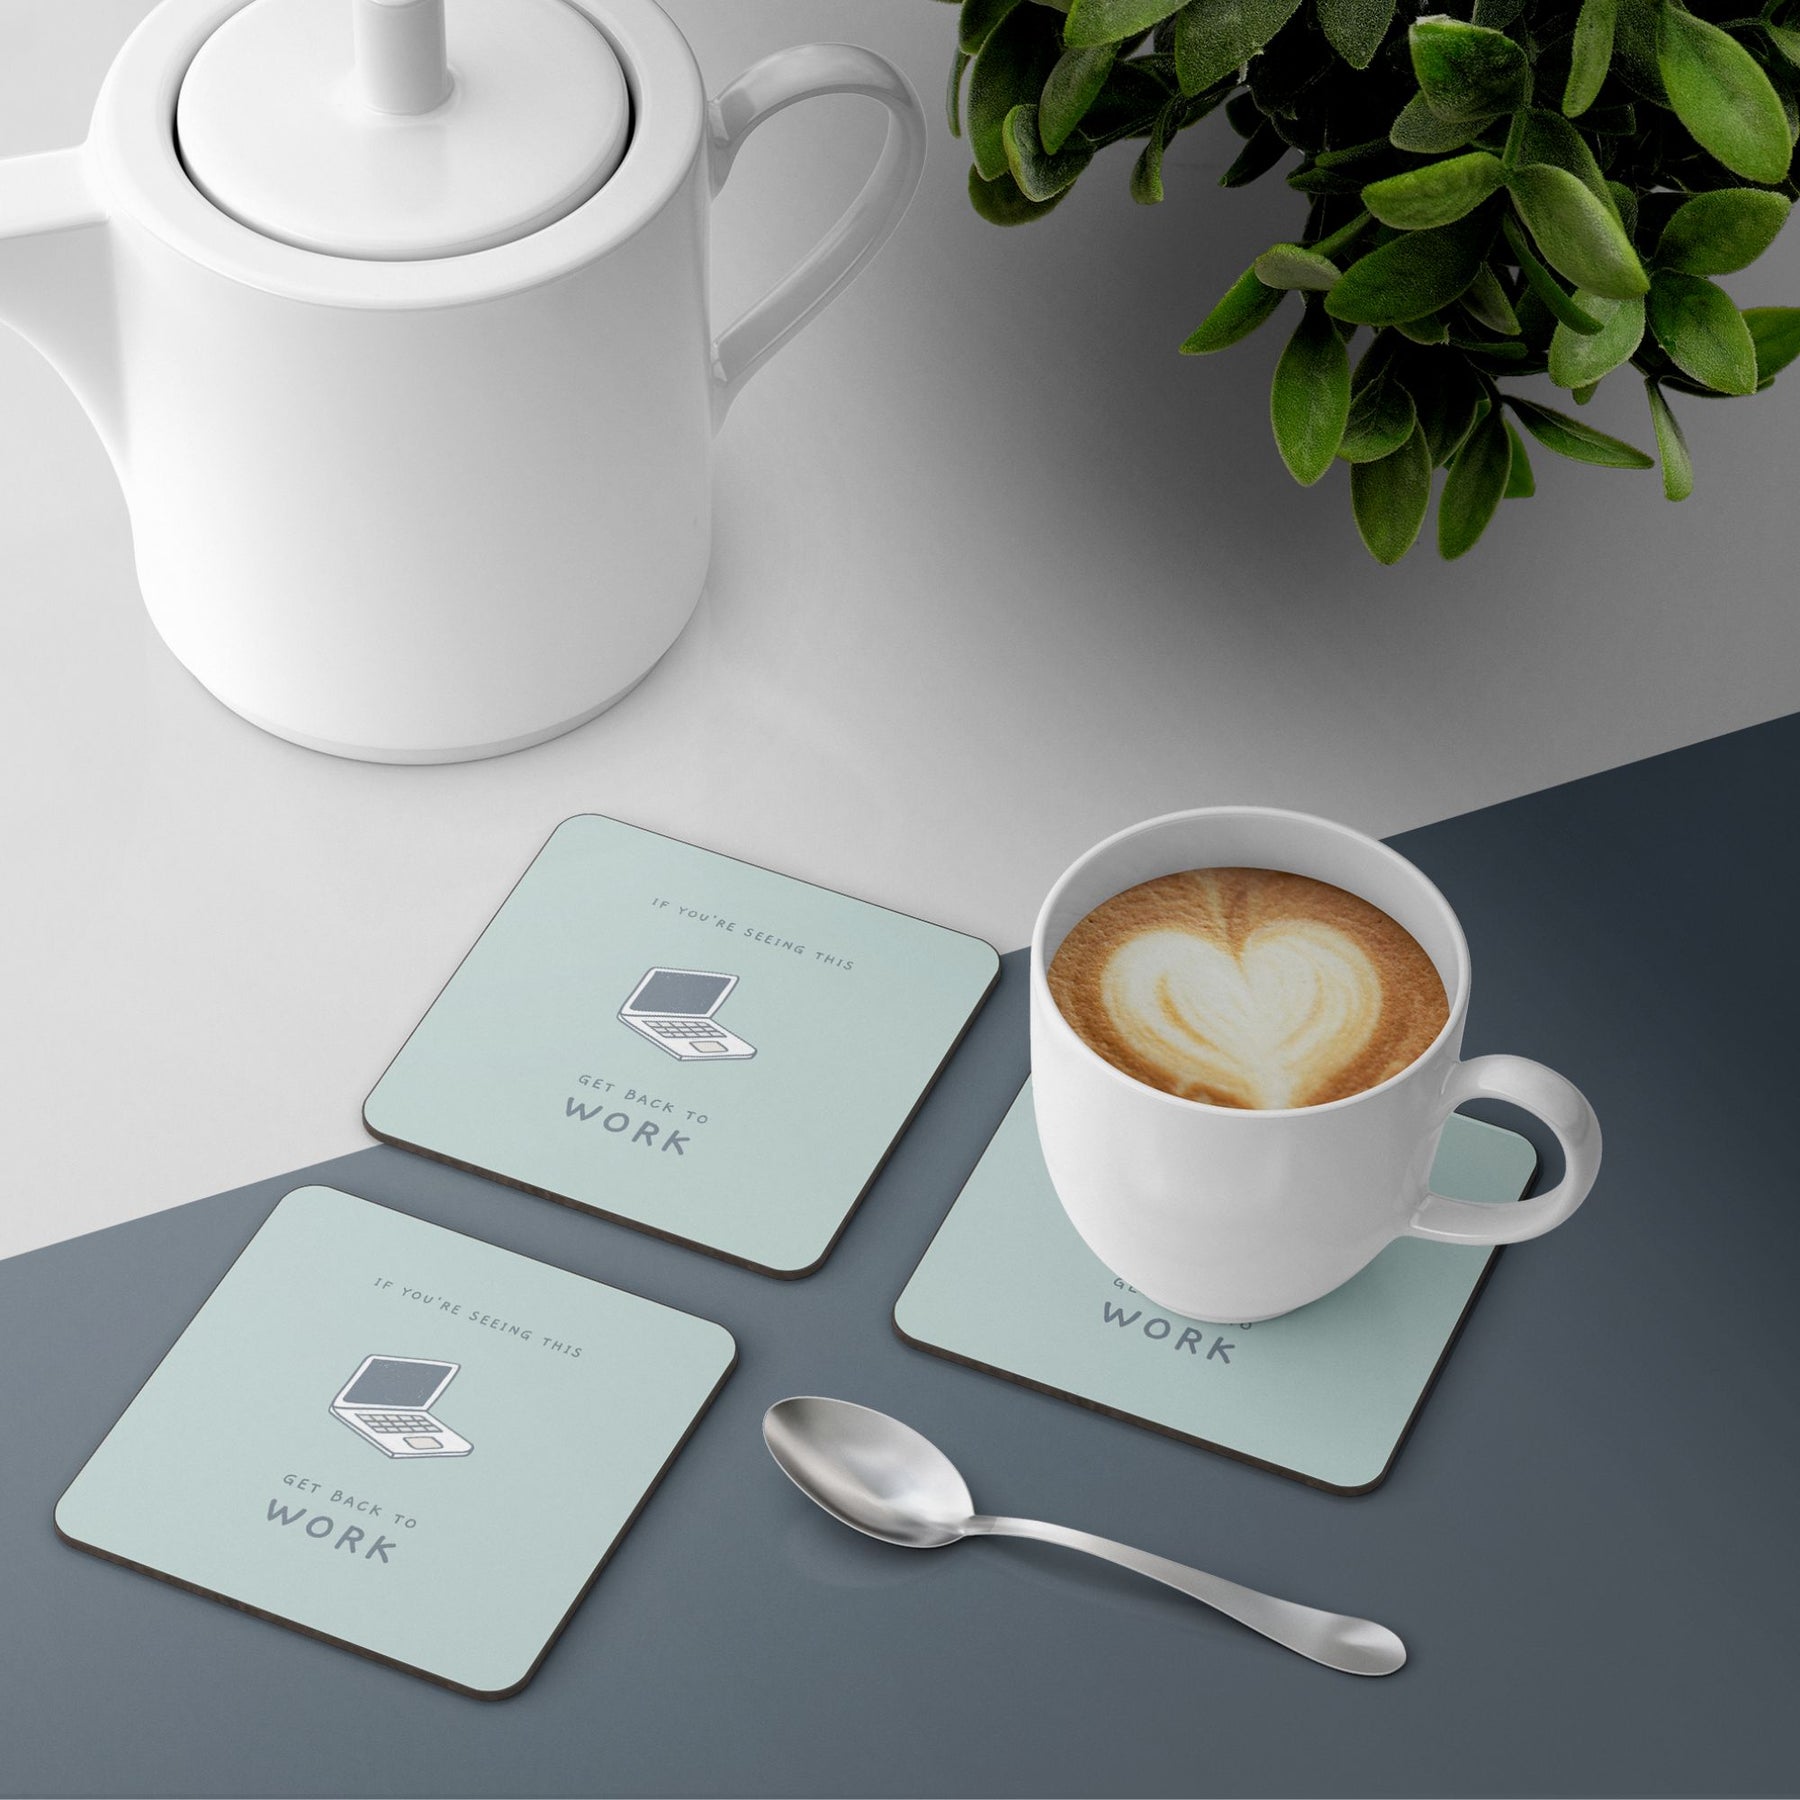 get-back-to-work-coffee-tea-coasters-set-pack-of-4-3mm-thick-gogirgit-com